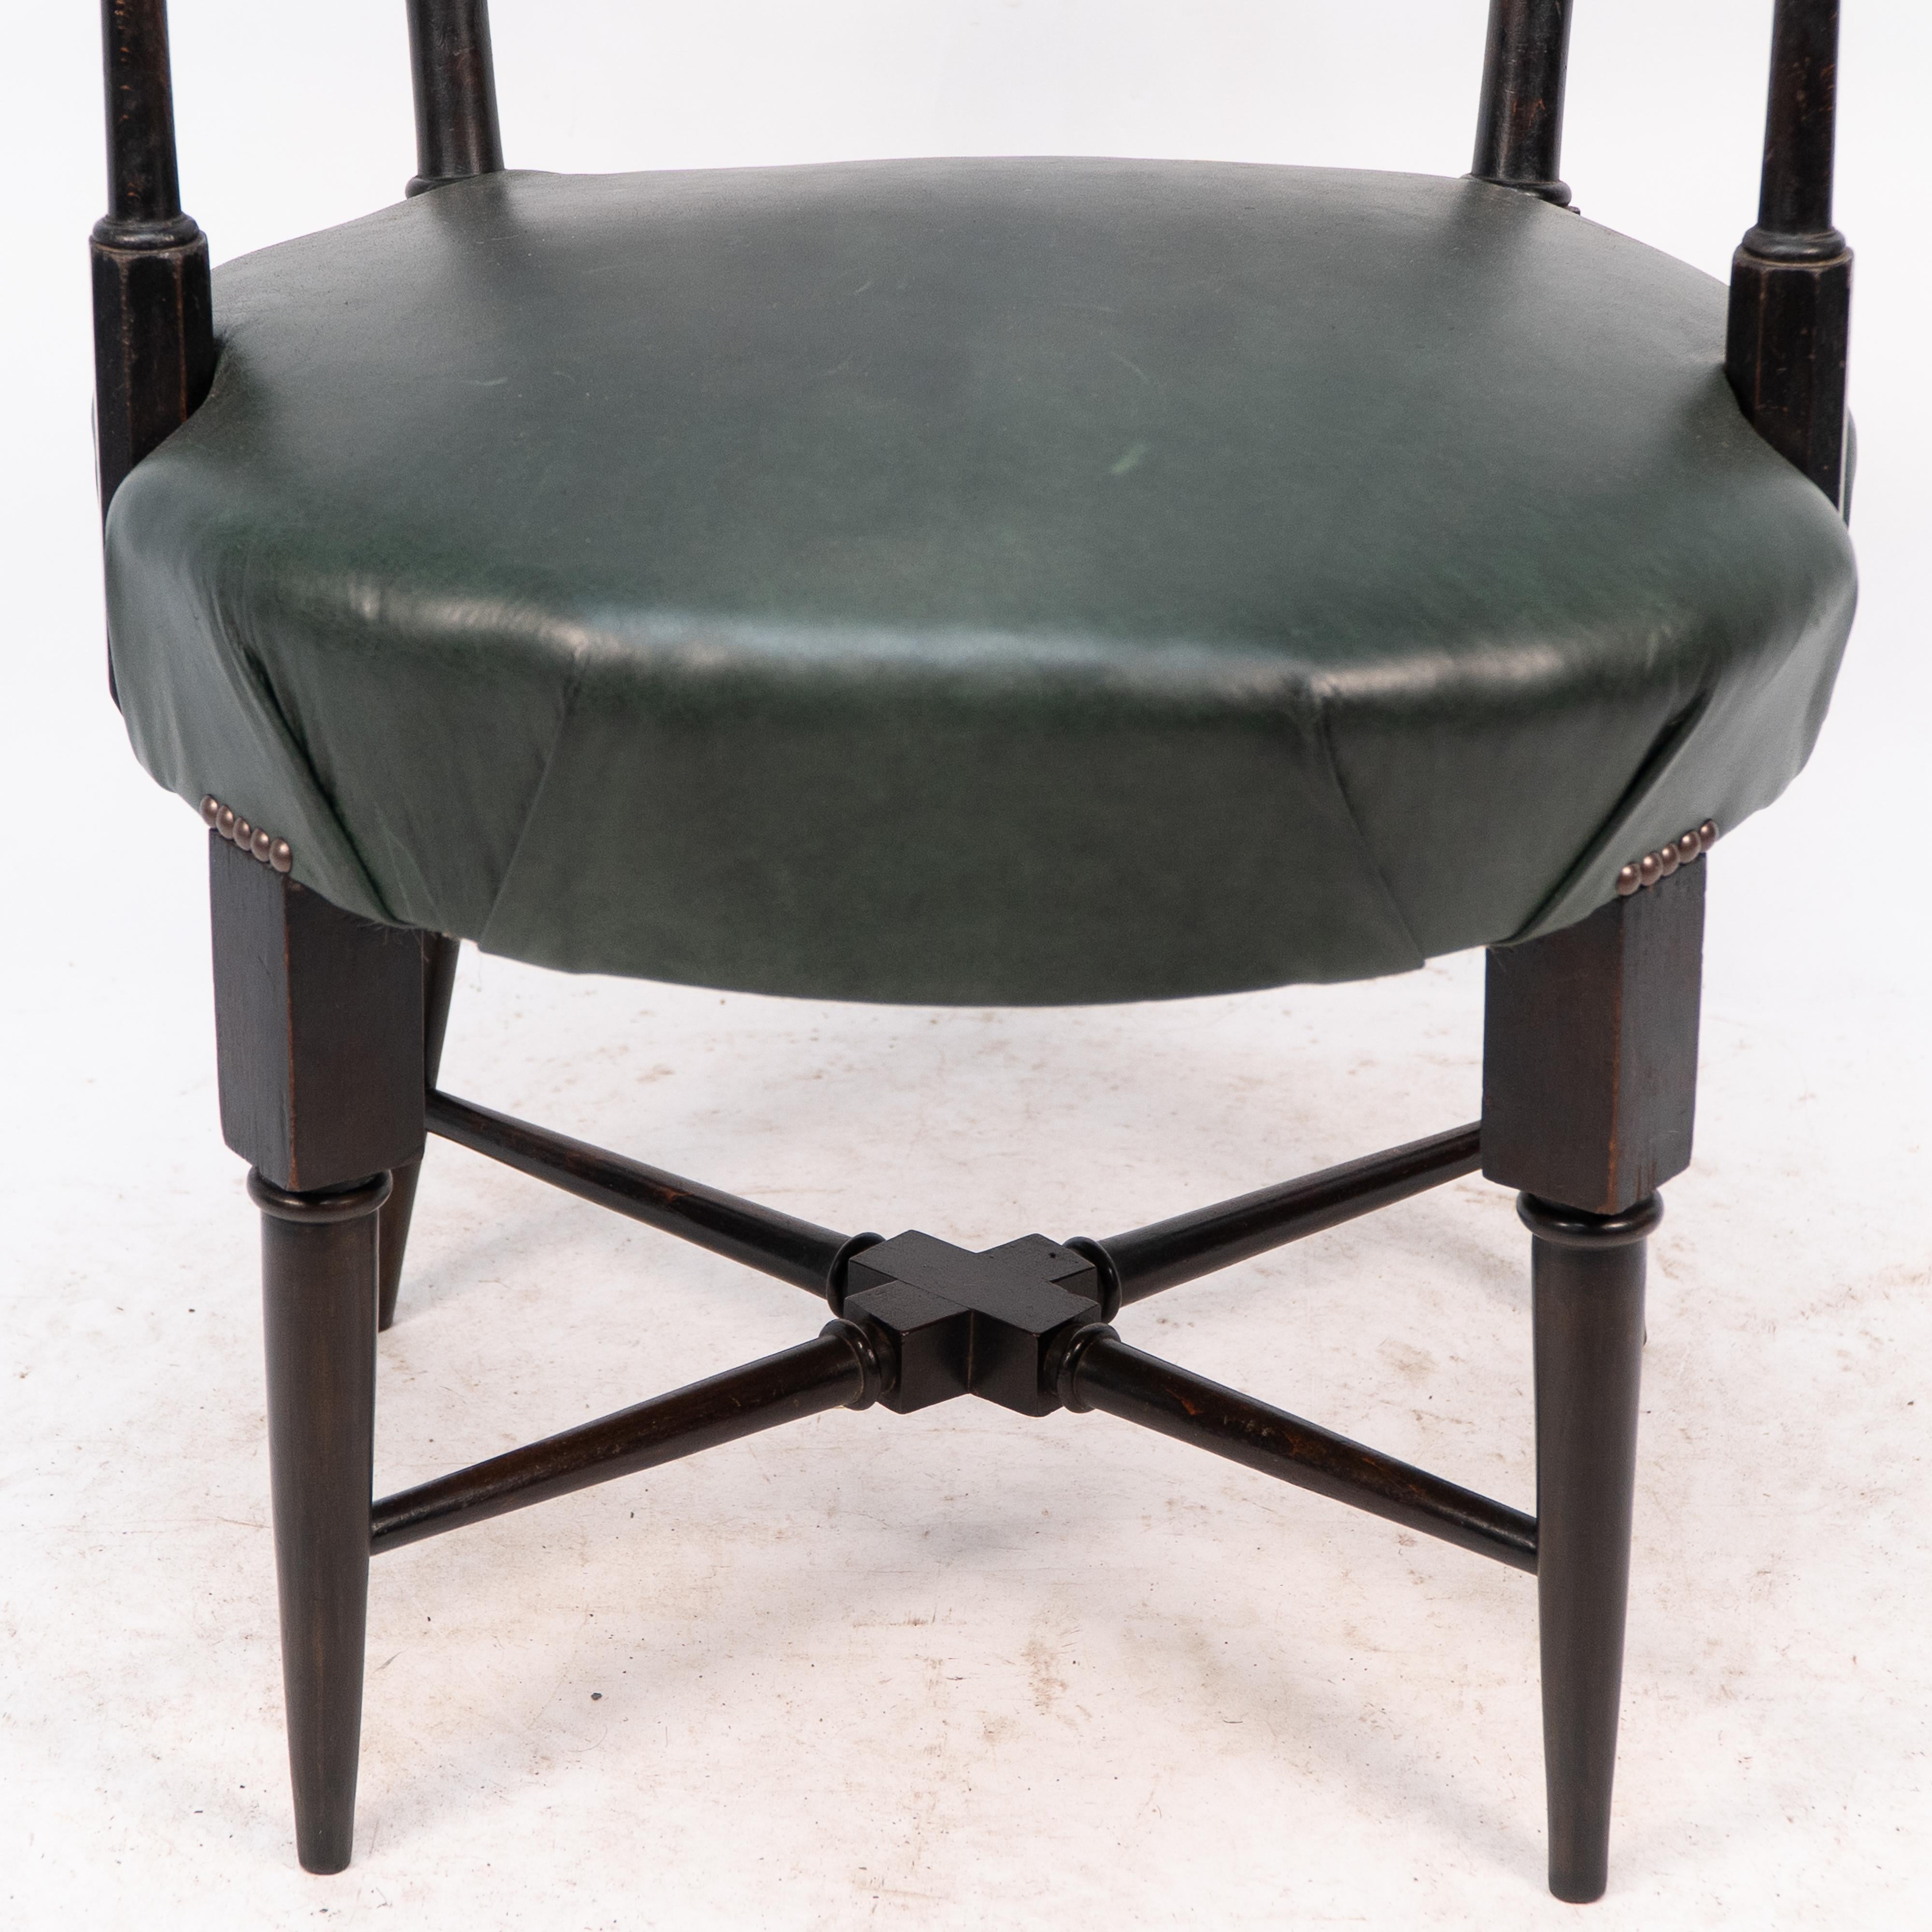 E W Godwin for William Watt. An Anglo-Japanese Old English or Jacobean armchair For Sale 5